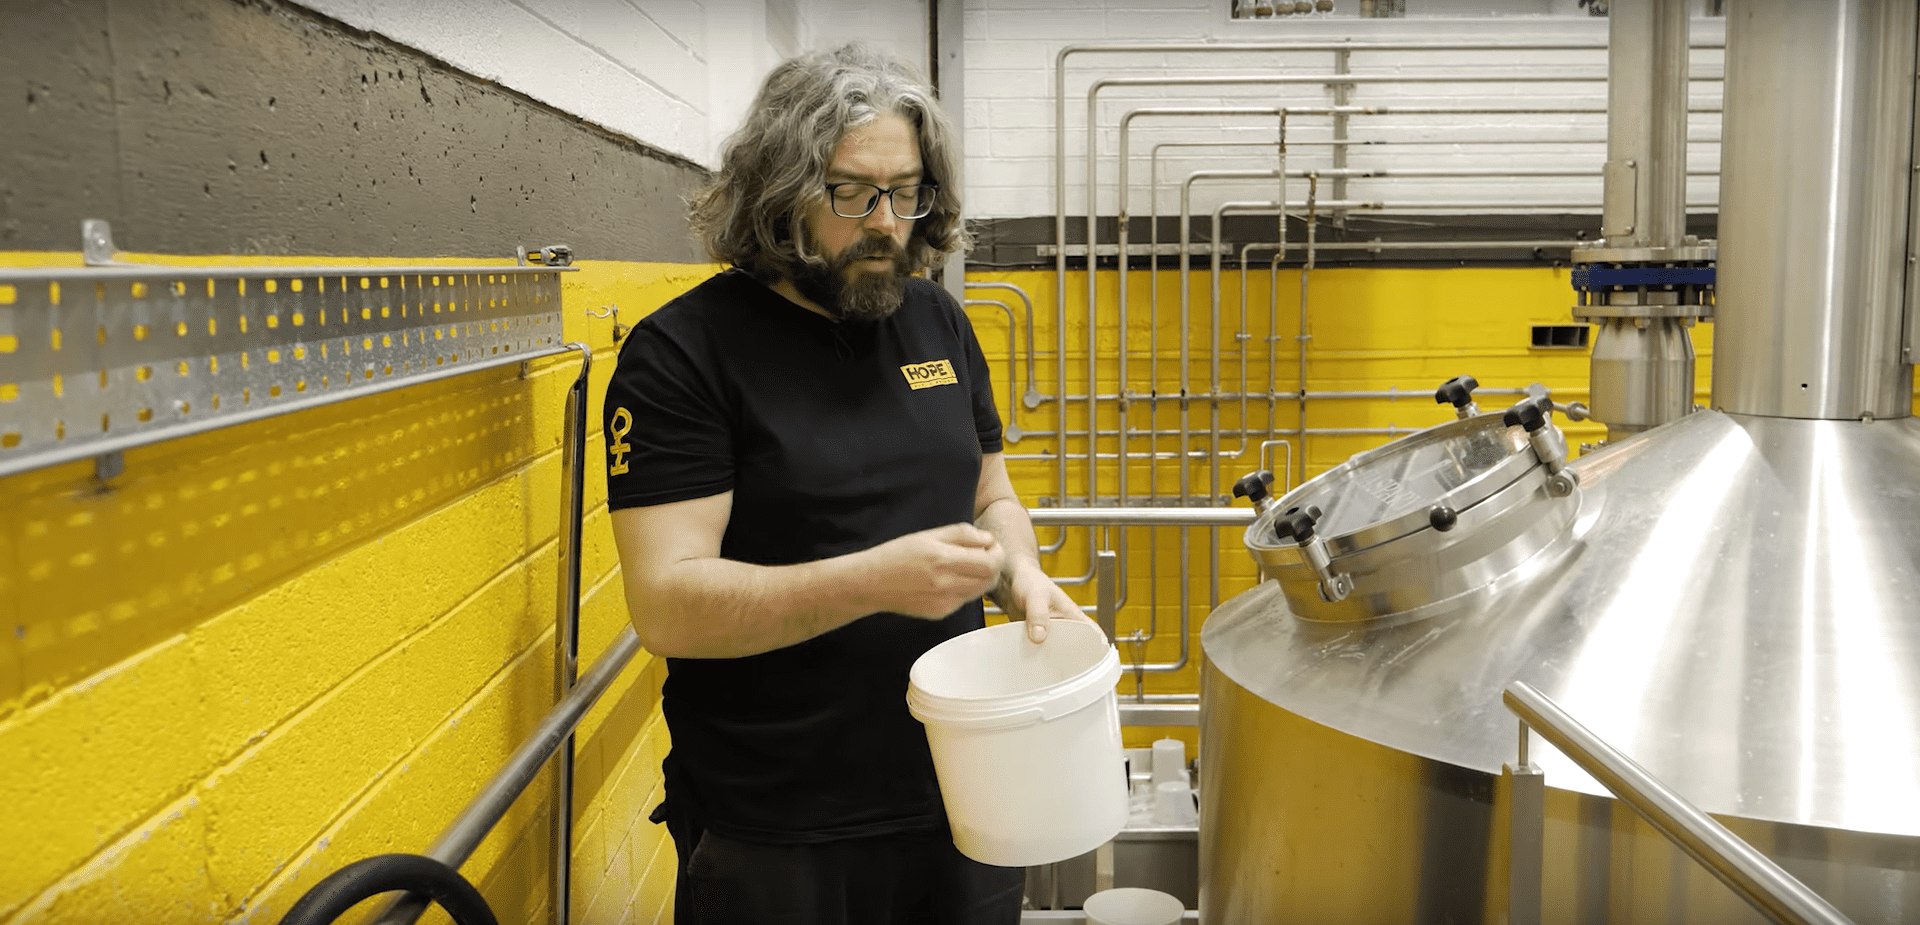 Dublin Craft Beer – Hope Brewing Company: Greeat Beer Since 2015